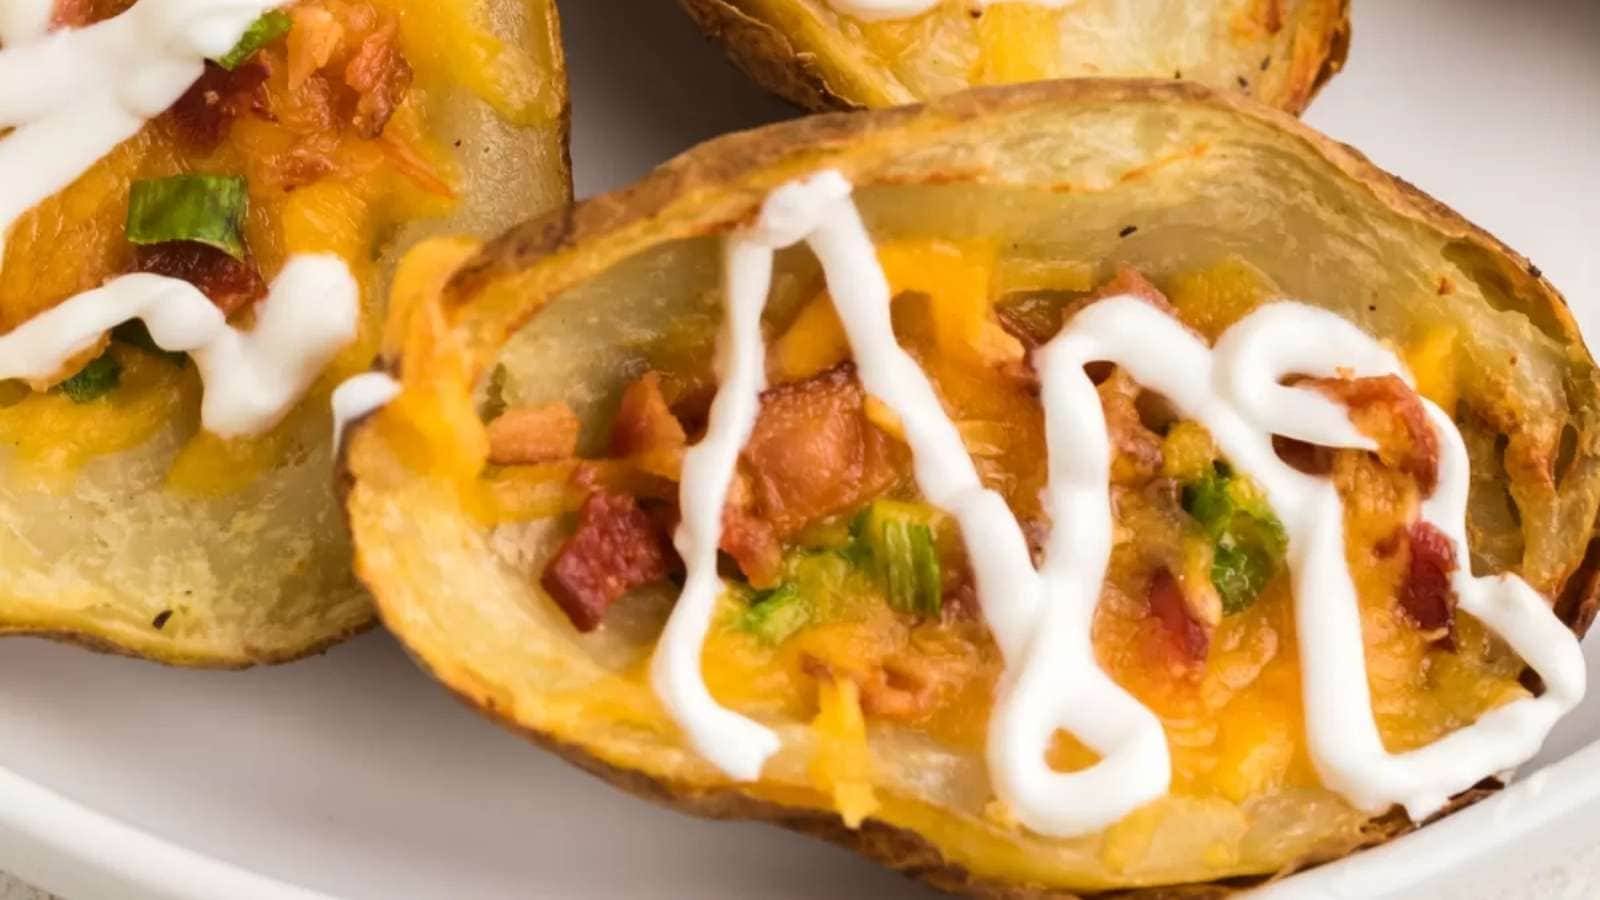 Cheesy potato skins with bacon and sour cream on a plate.